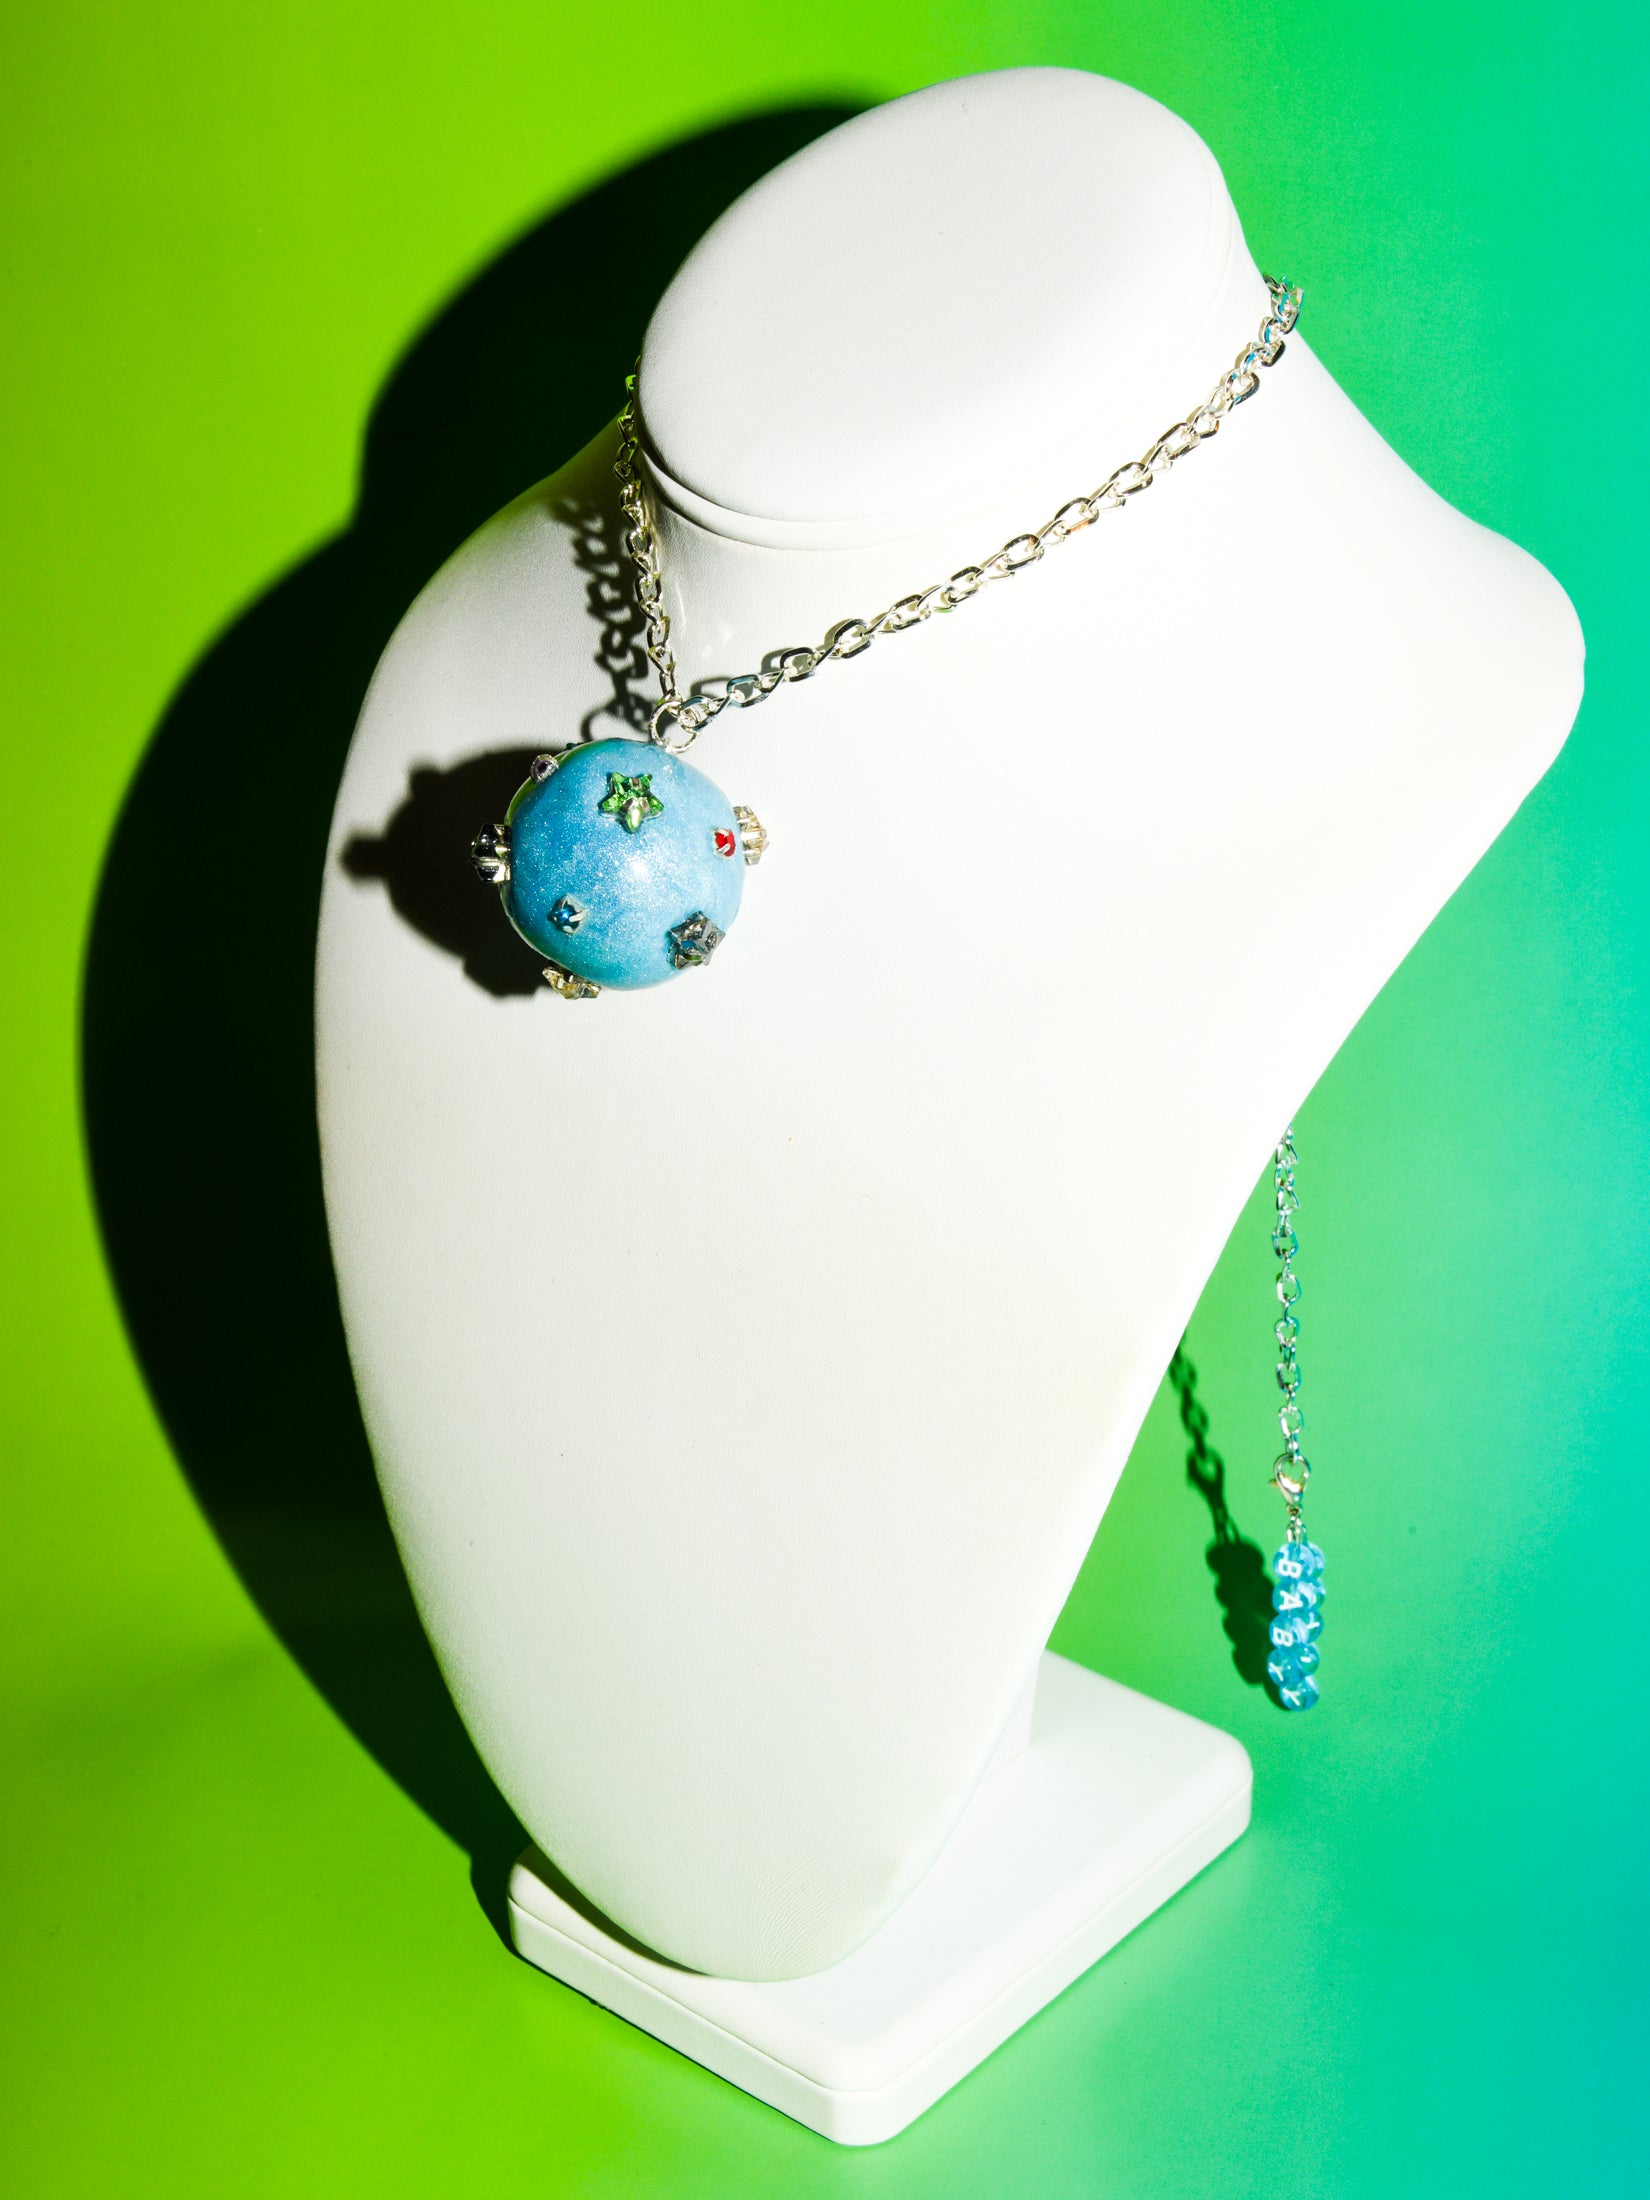 Star Ball Choker Necklace in Blue Wave